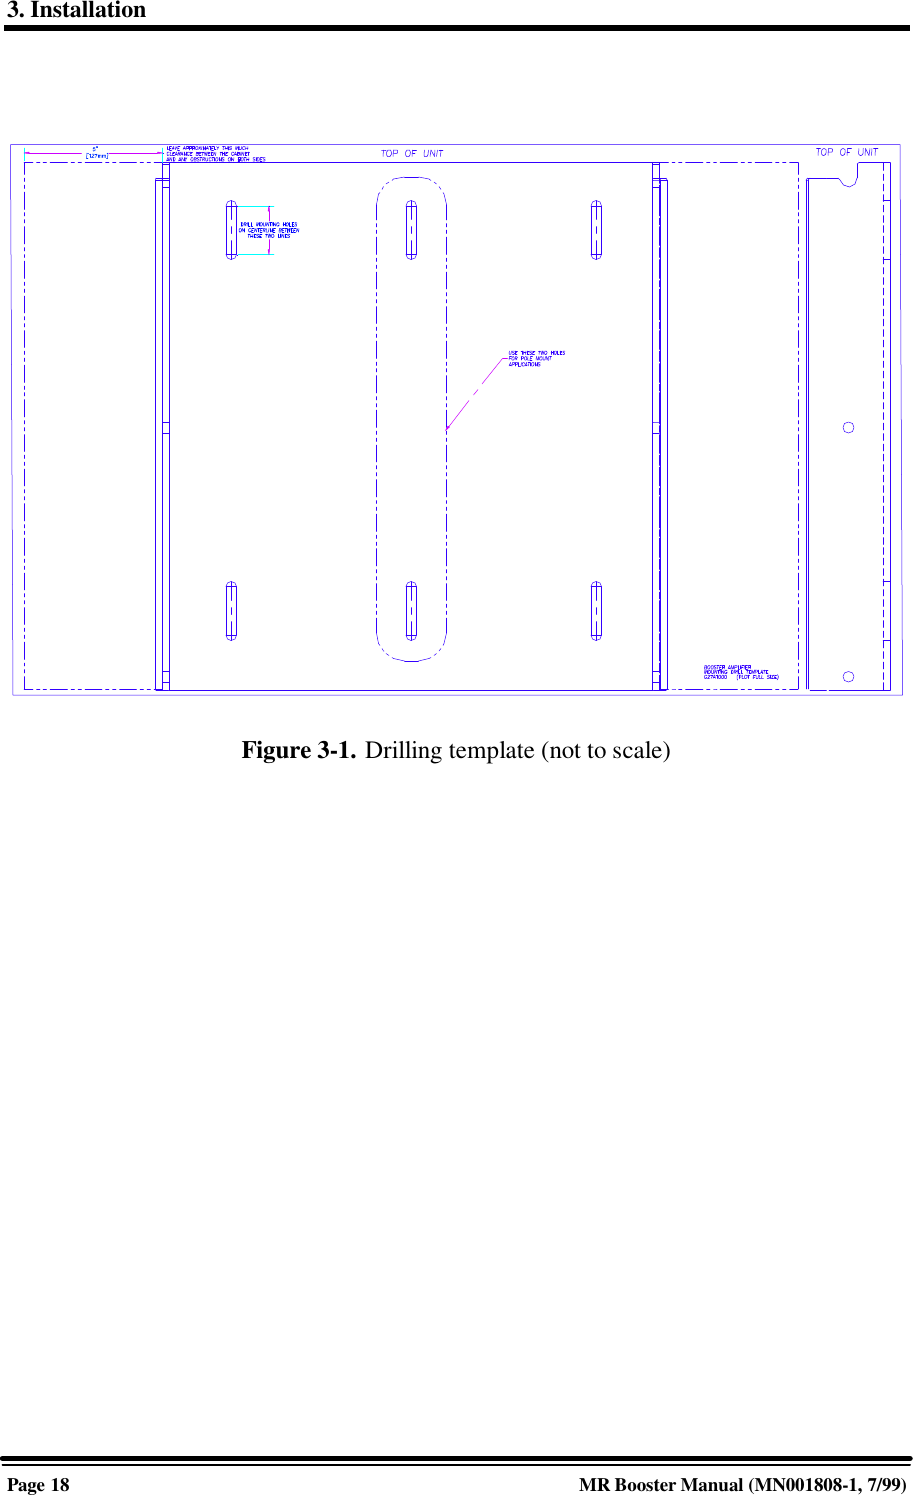 3. InstallationPage 18 MR Booster Manual (MN001808-1, 7/99)Figure 3-1. Drilling template (not to scale)